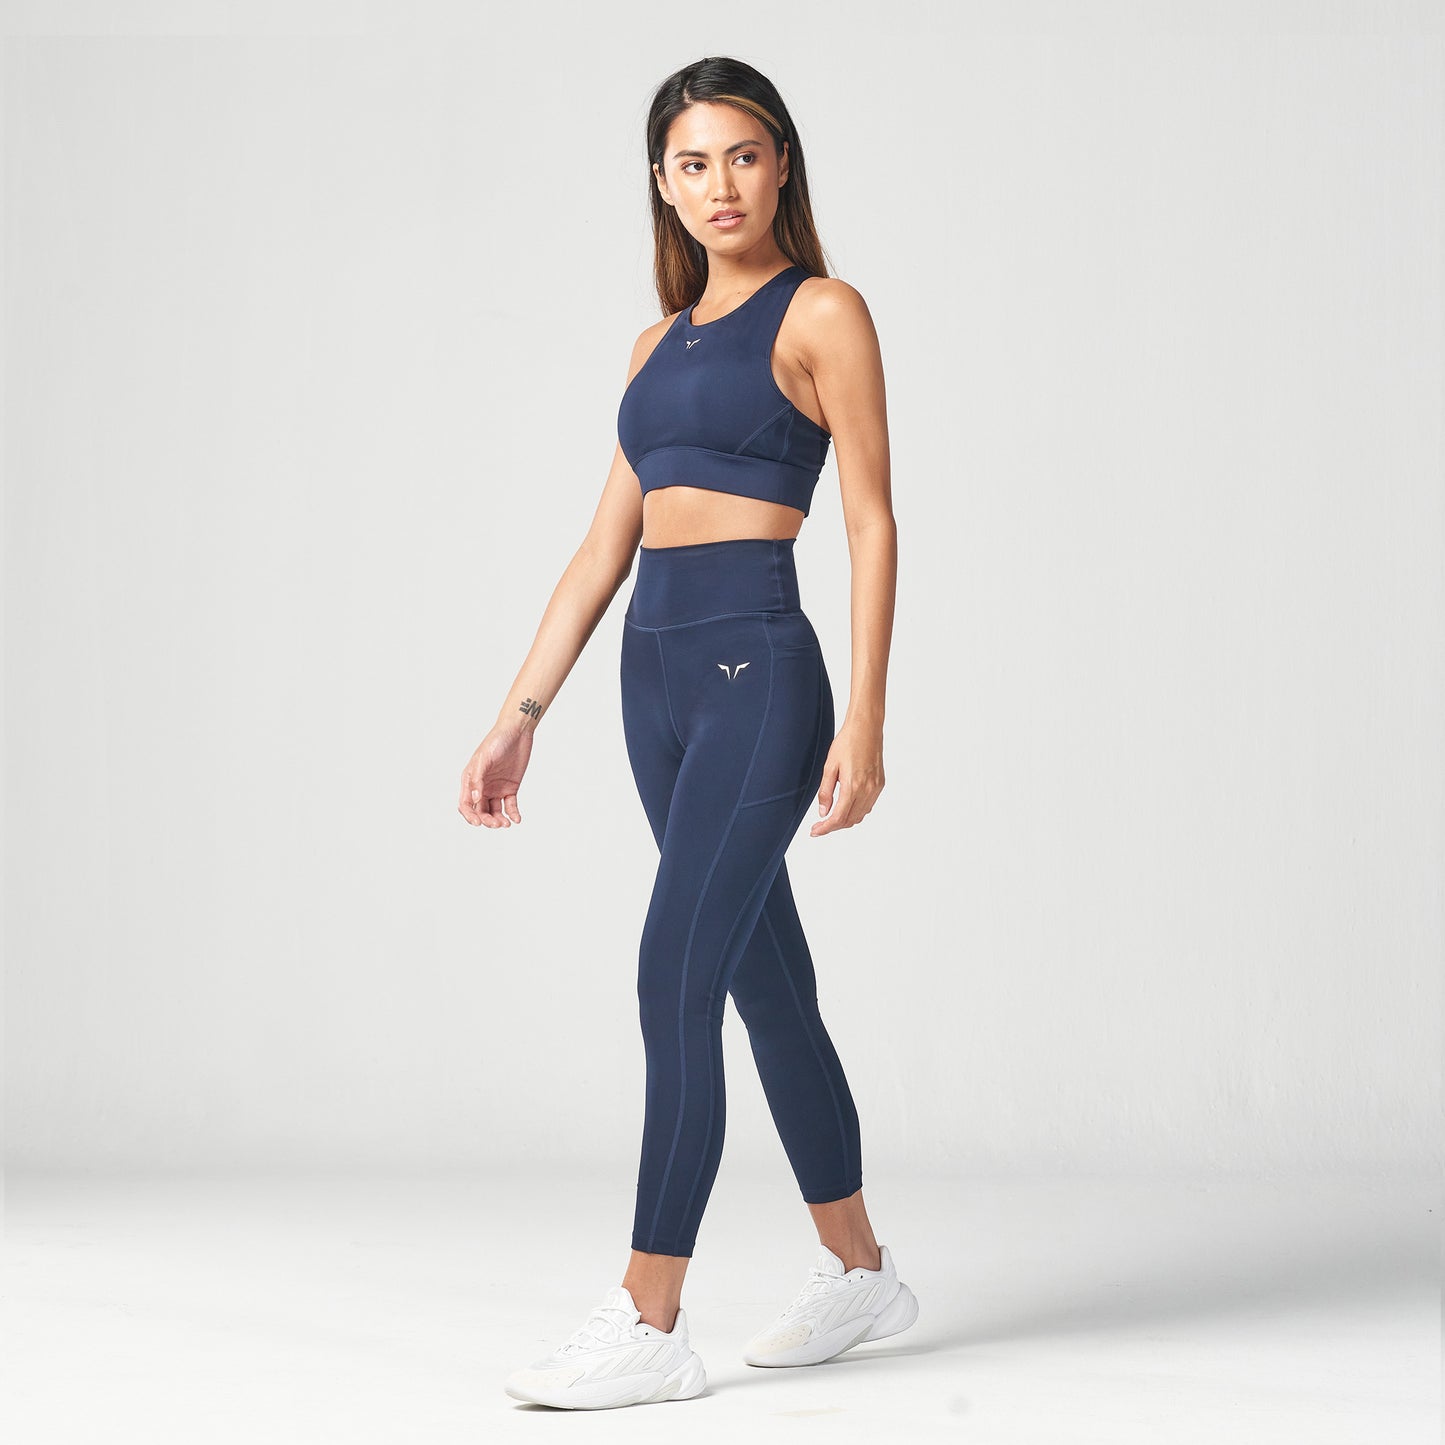 squatwolf-workout-clothes-essential-high-impact-bra-navy-sports-bra-for-gym